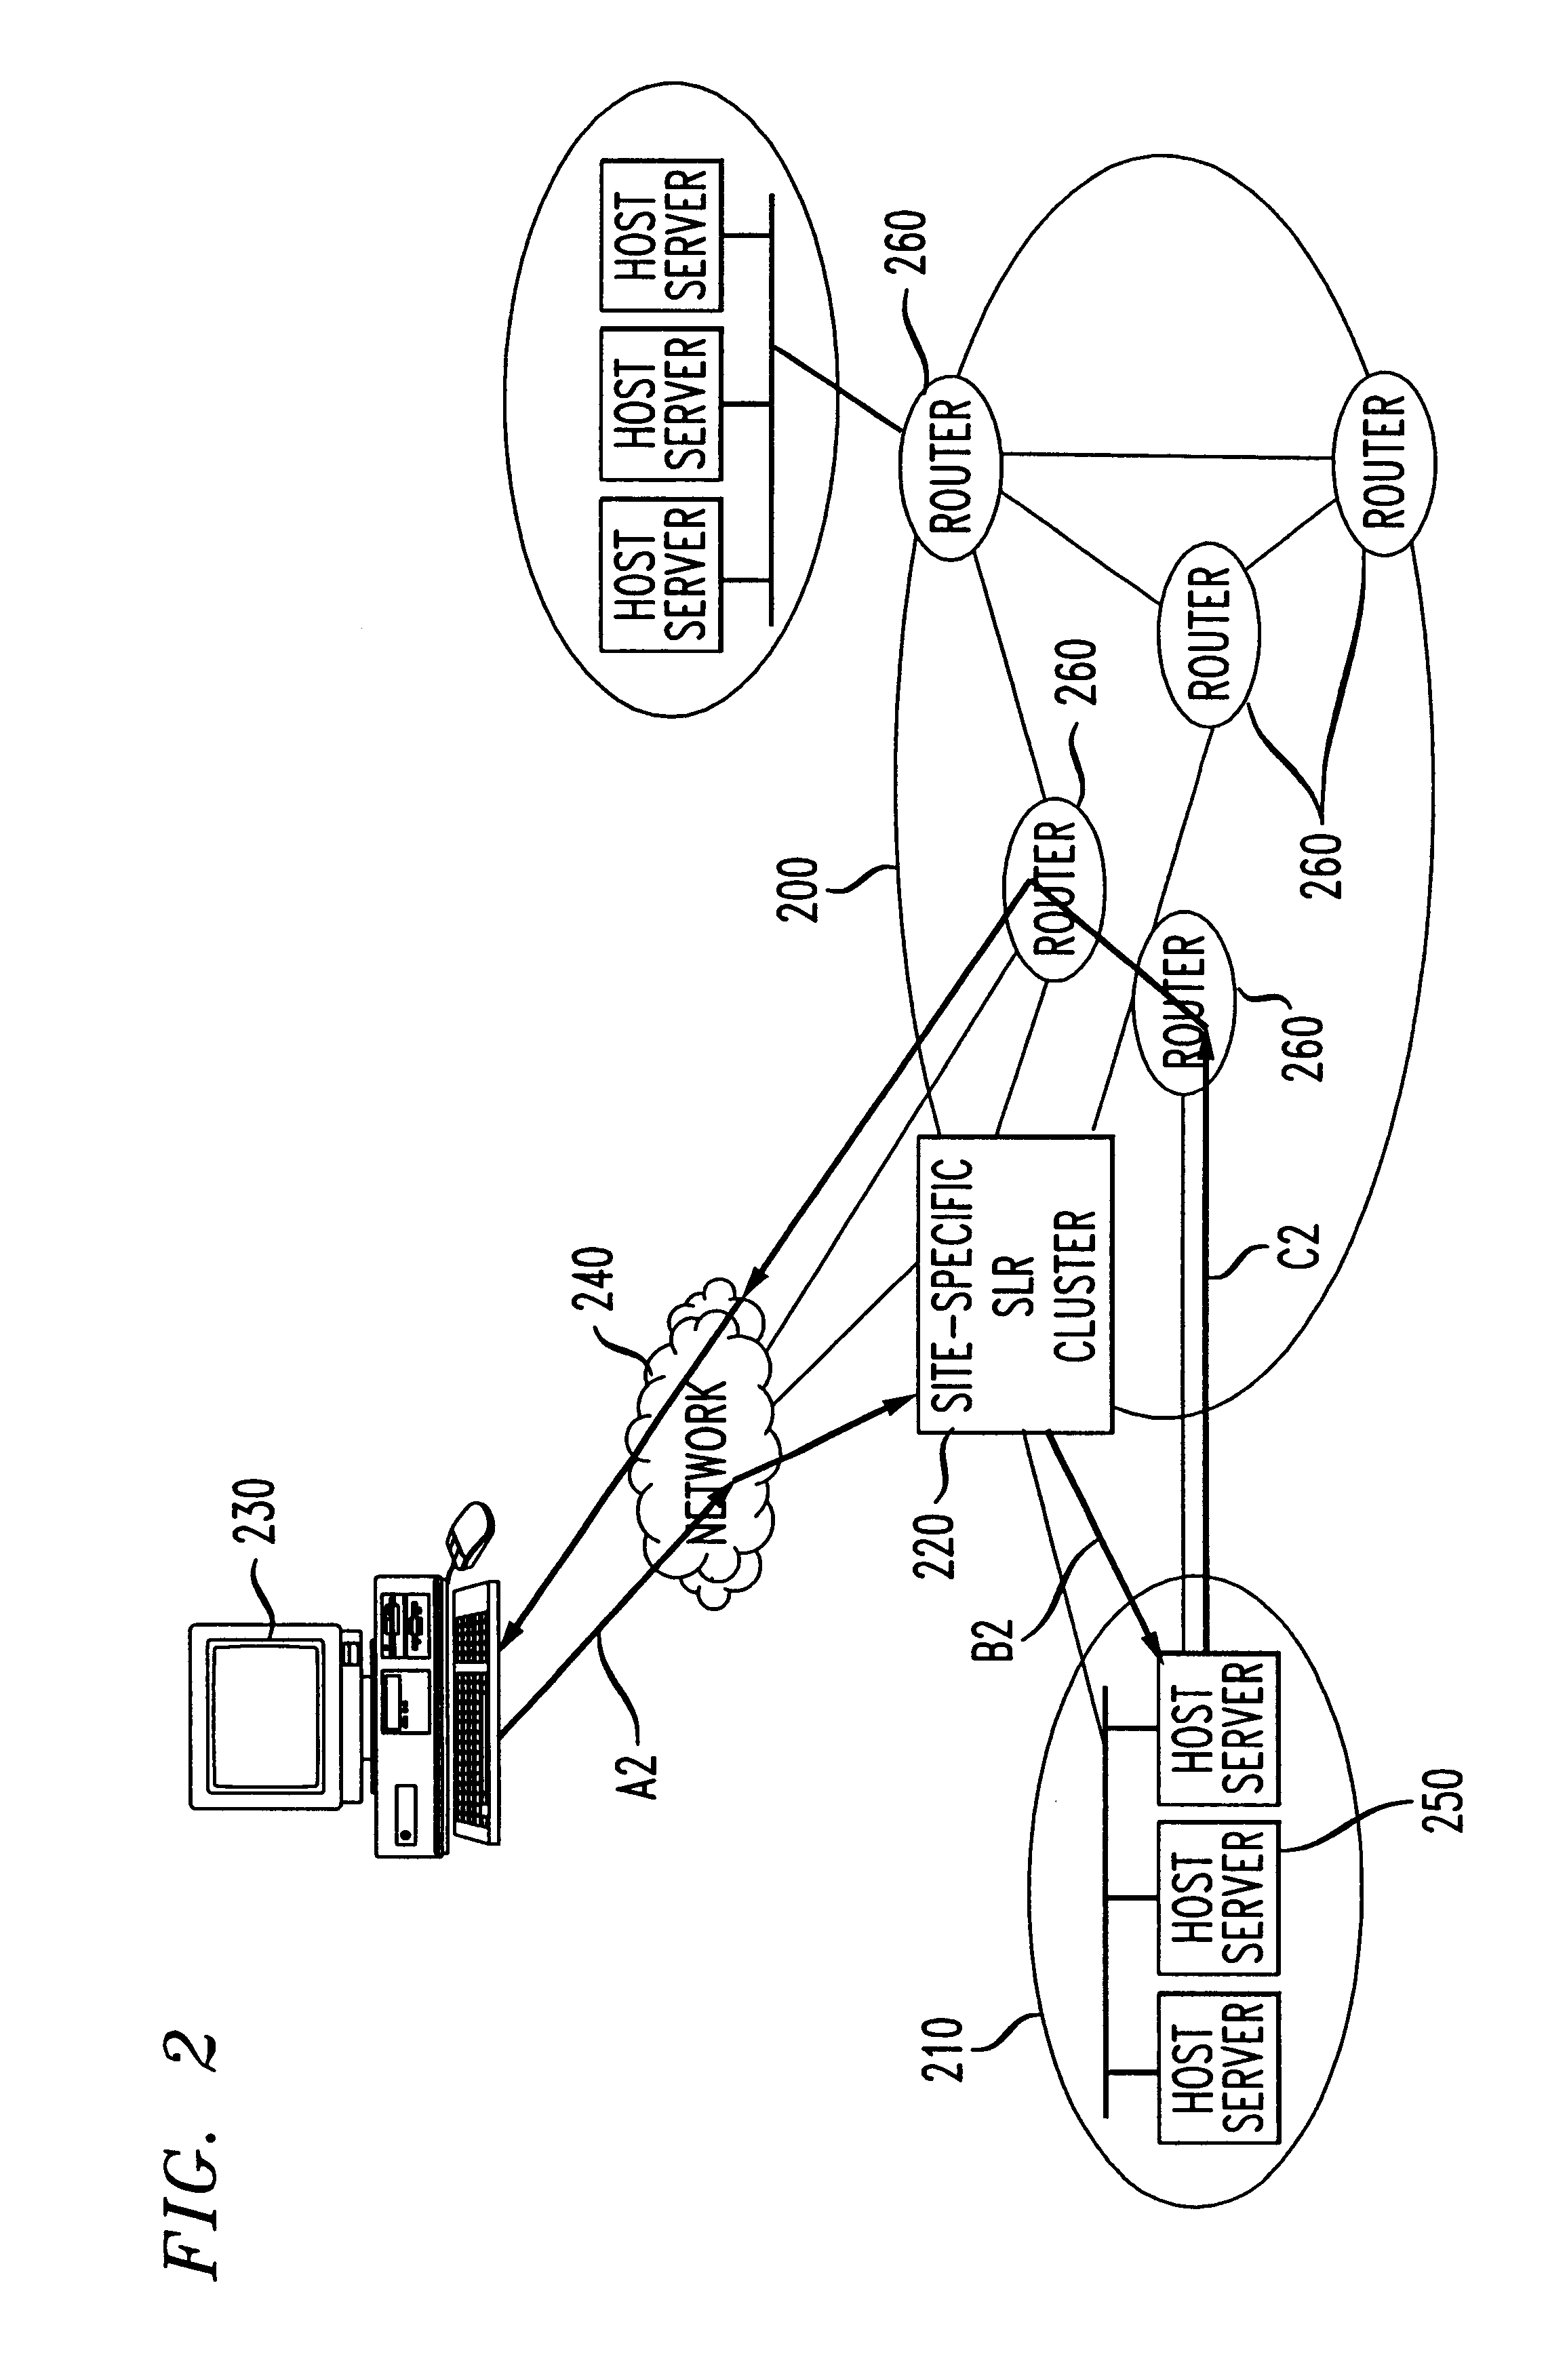 System, method and apparatus for network service load and reliability management